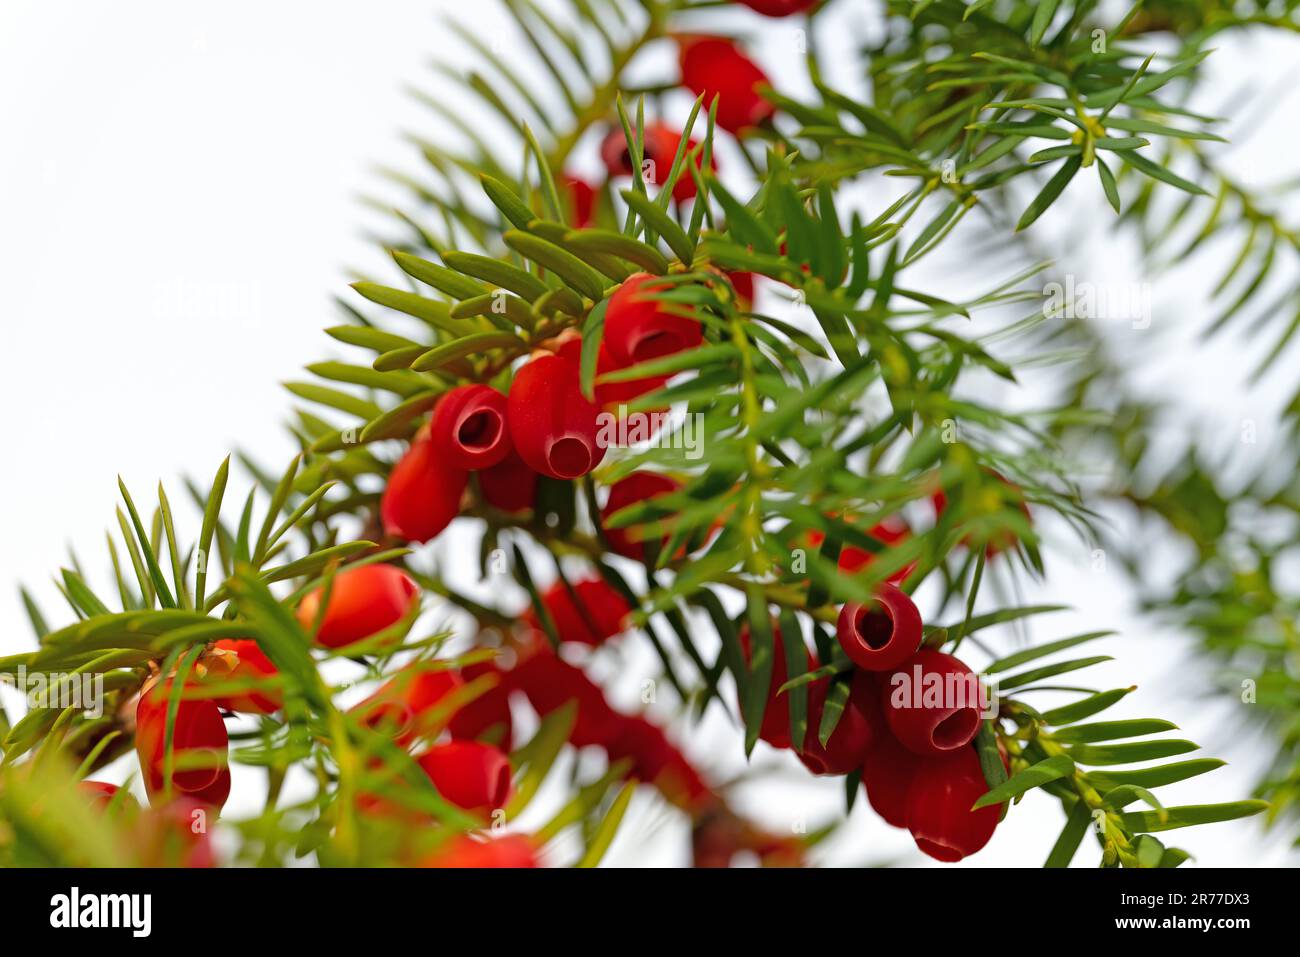 Fruits of the yew tree in a close-up Stock Photo